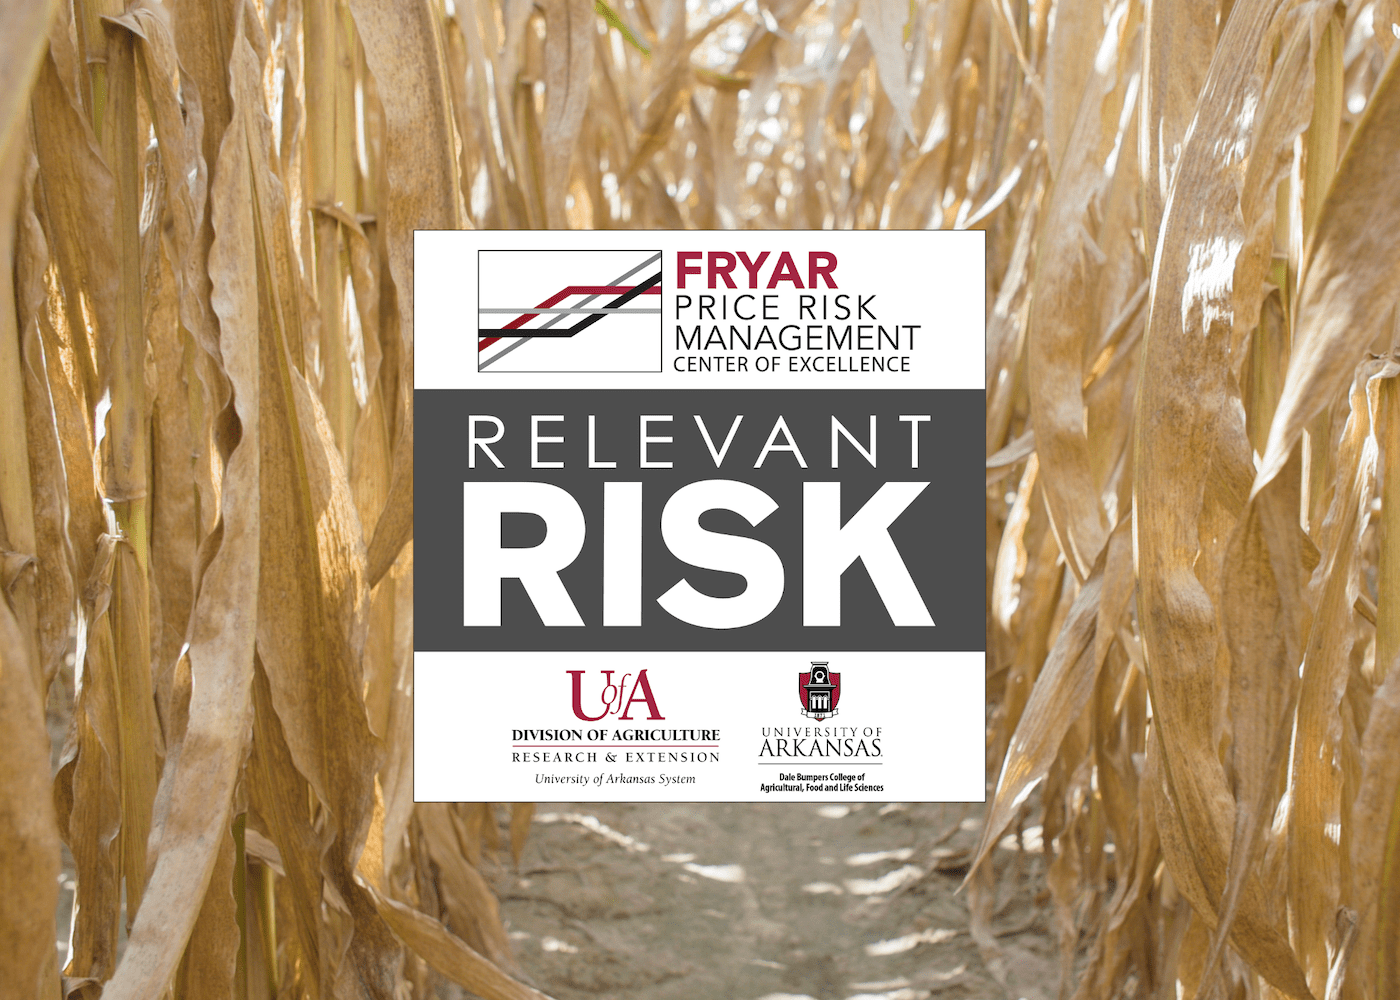 Ep 23. Crop Market Update and Pre-Harvest Risk Management Considerations